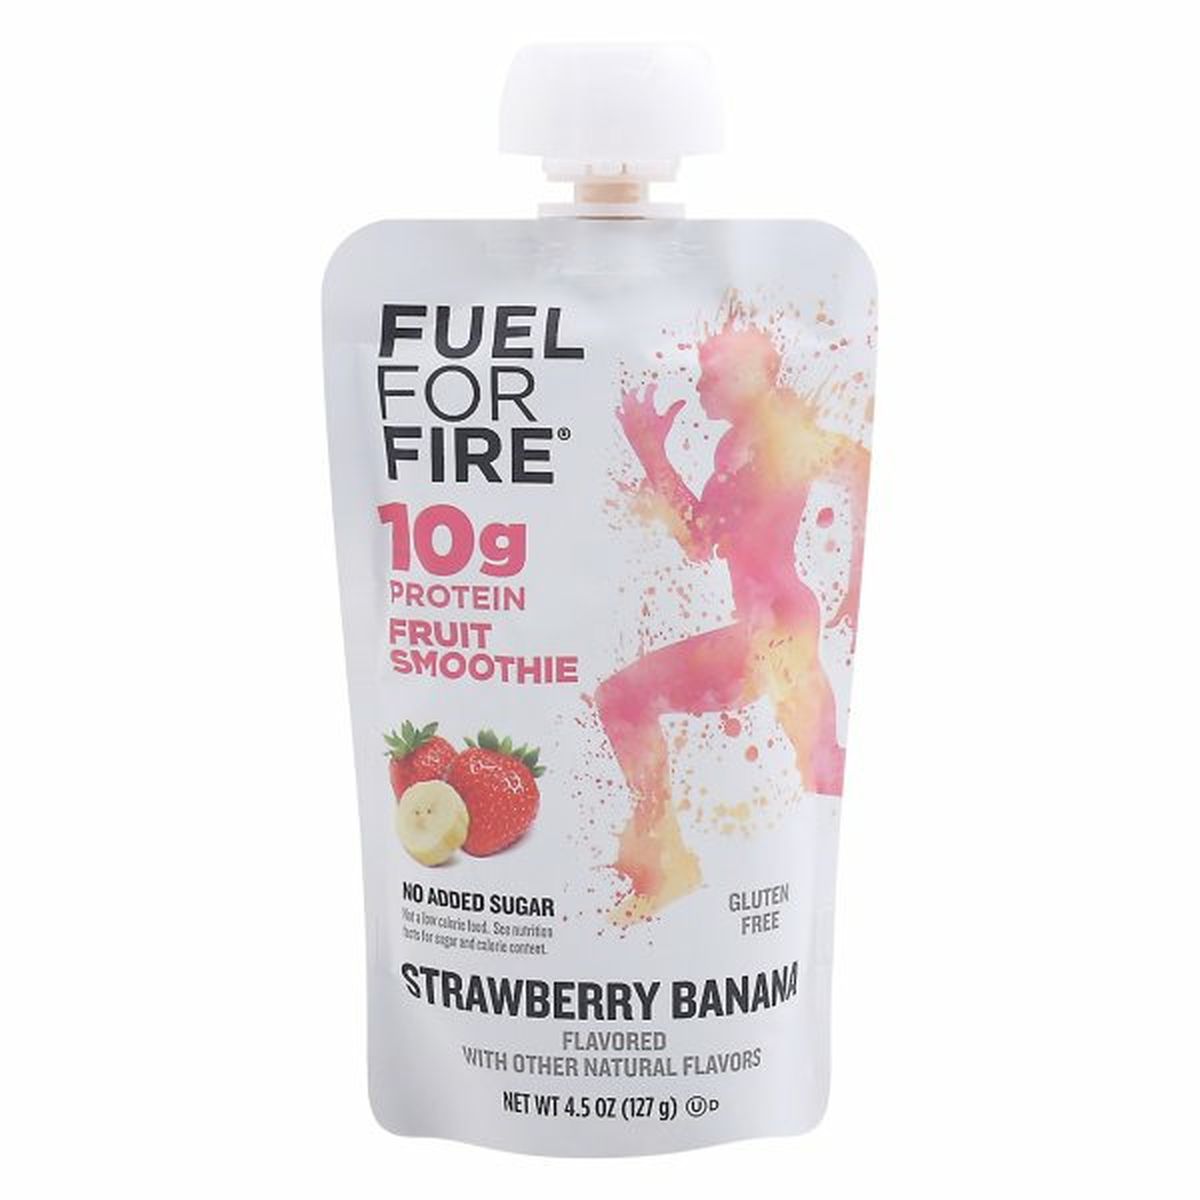 Calories in Fuel for Fire Fruit Smoothie, Strawberry Banana